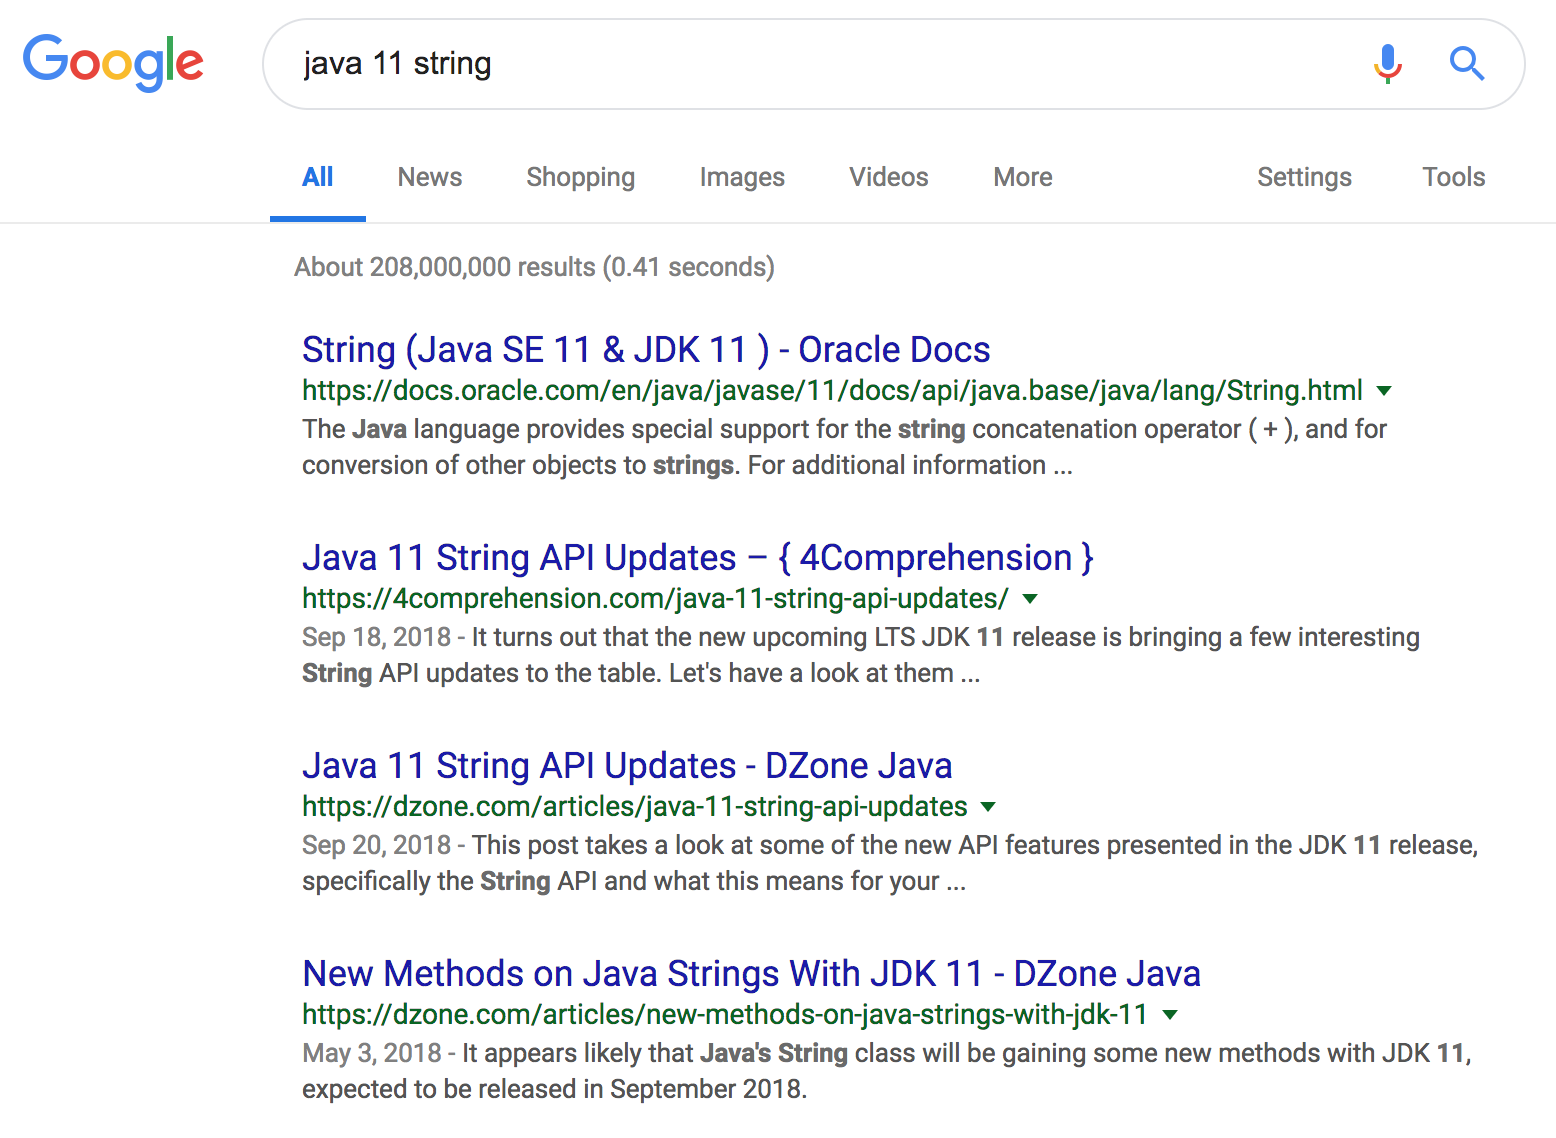 Searching for "java 11 string" gives me the correct
javadoc